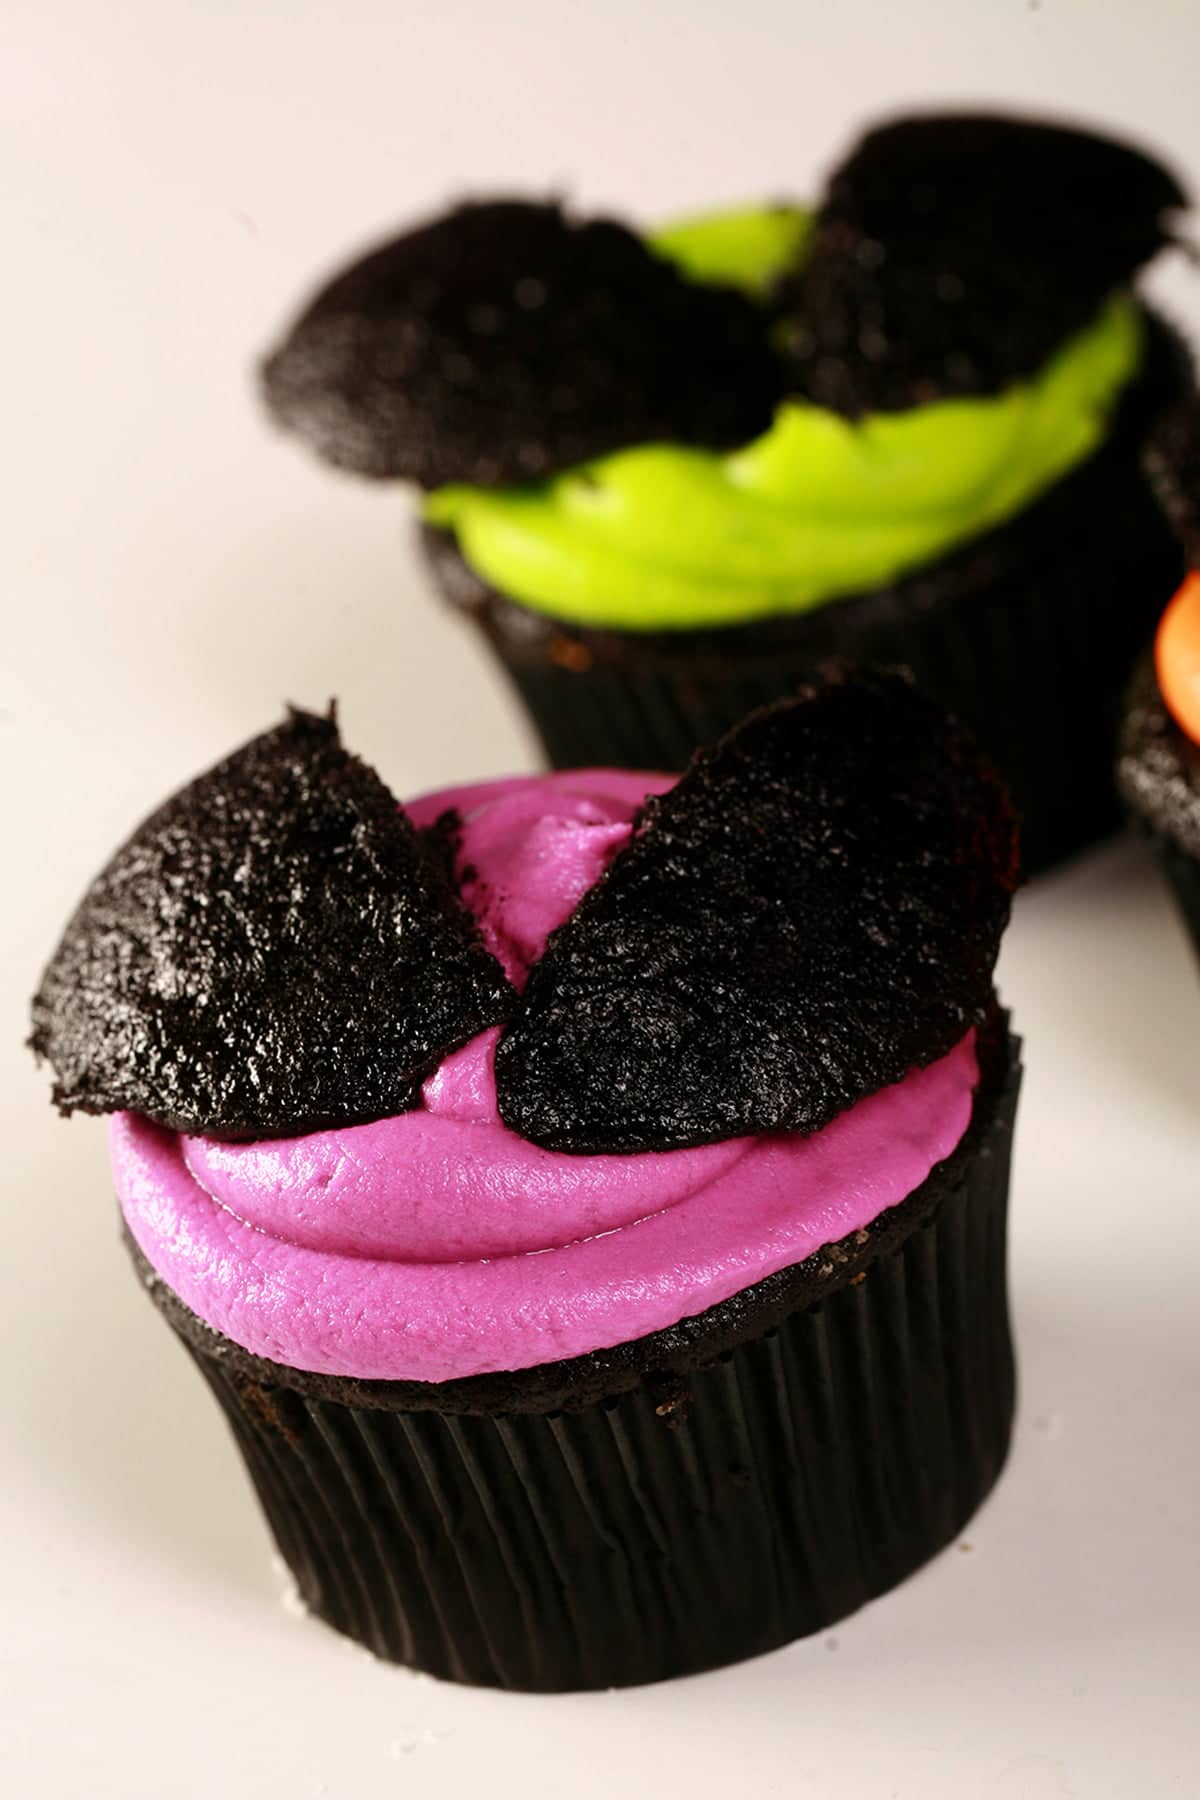 3 Easy Halloween Bat Cupcakes - Black Velvet Cupcakes with the dome cut off, frosted with brightly coloured icing - electric purple, lime green, and orange - then the halved dome of the cupcake is re-positioned on top to form bat wings.